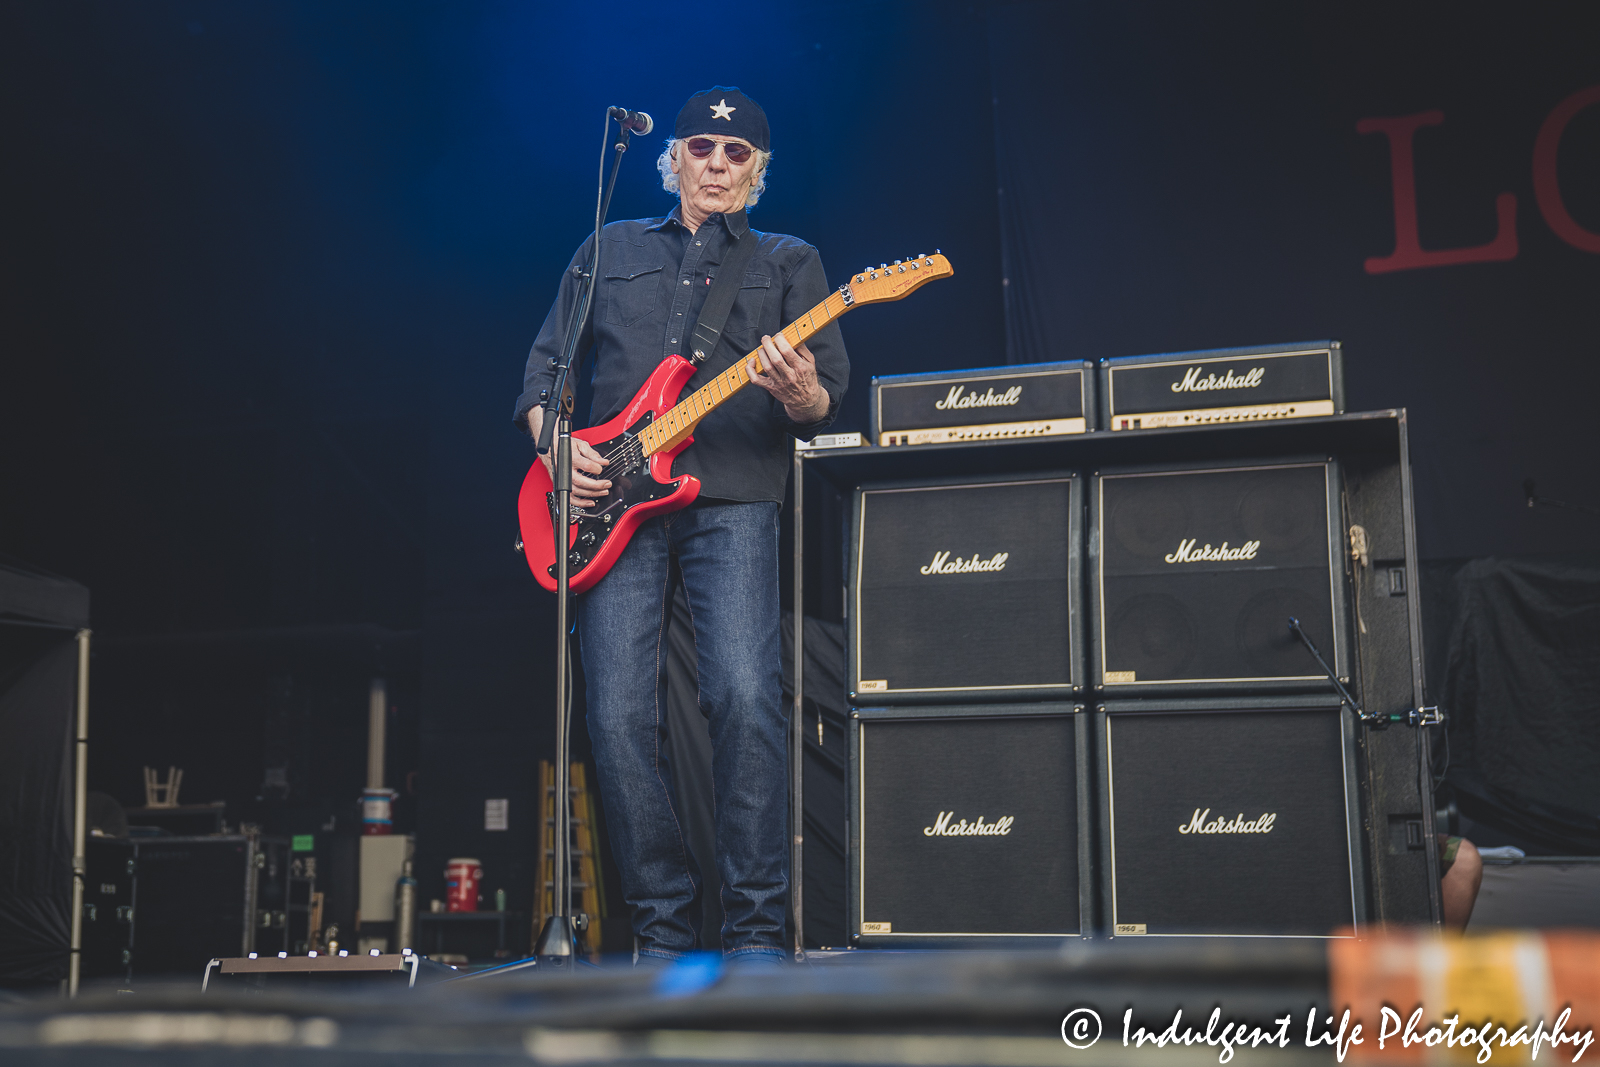 Loverboy guitarist Paul Dean performing "Notorious" live at Starlight Theatre in Kansas City, MO on July 18, 2023.